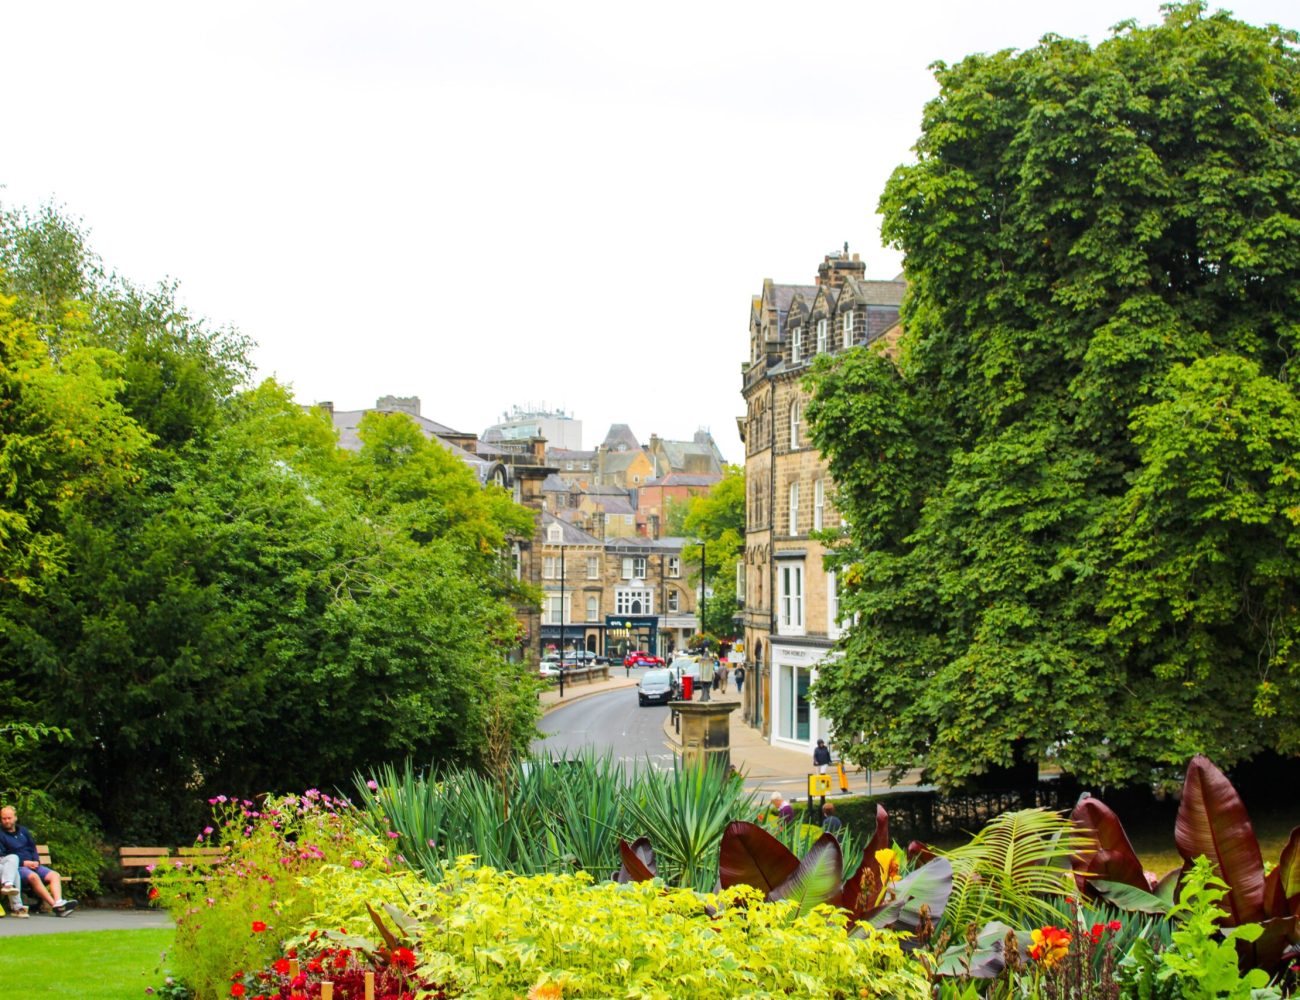 photo of harrogate gardens in the town centre